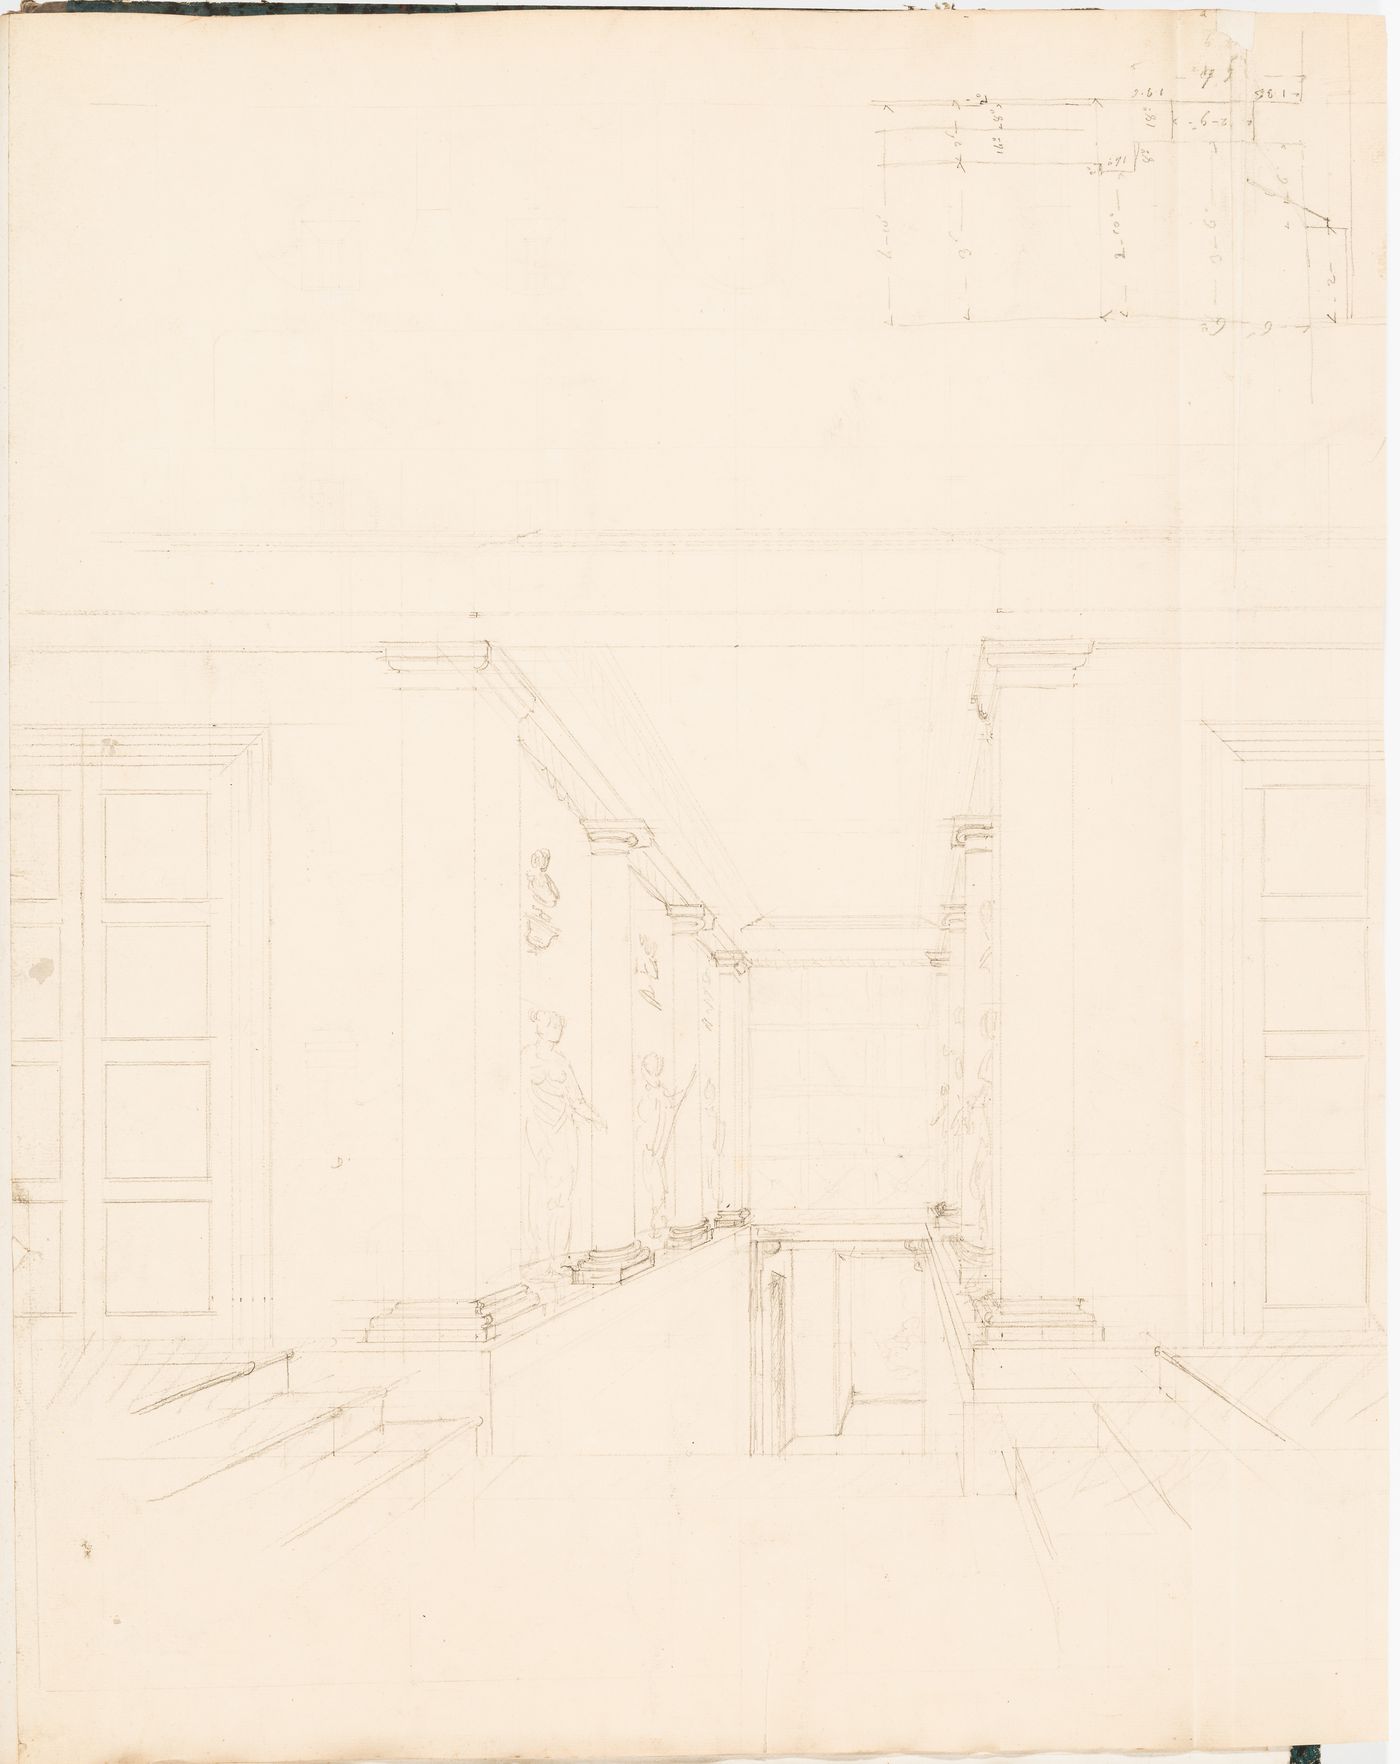 Rohault de Fleury House, 12-14 rue d'Aguesseau, Paris: Interior perspective showing the main staircase from the ground floor with partial plan; verso: Foundation plan for an unidentified building